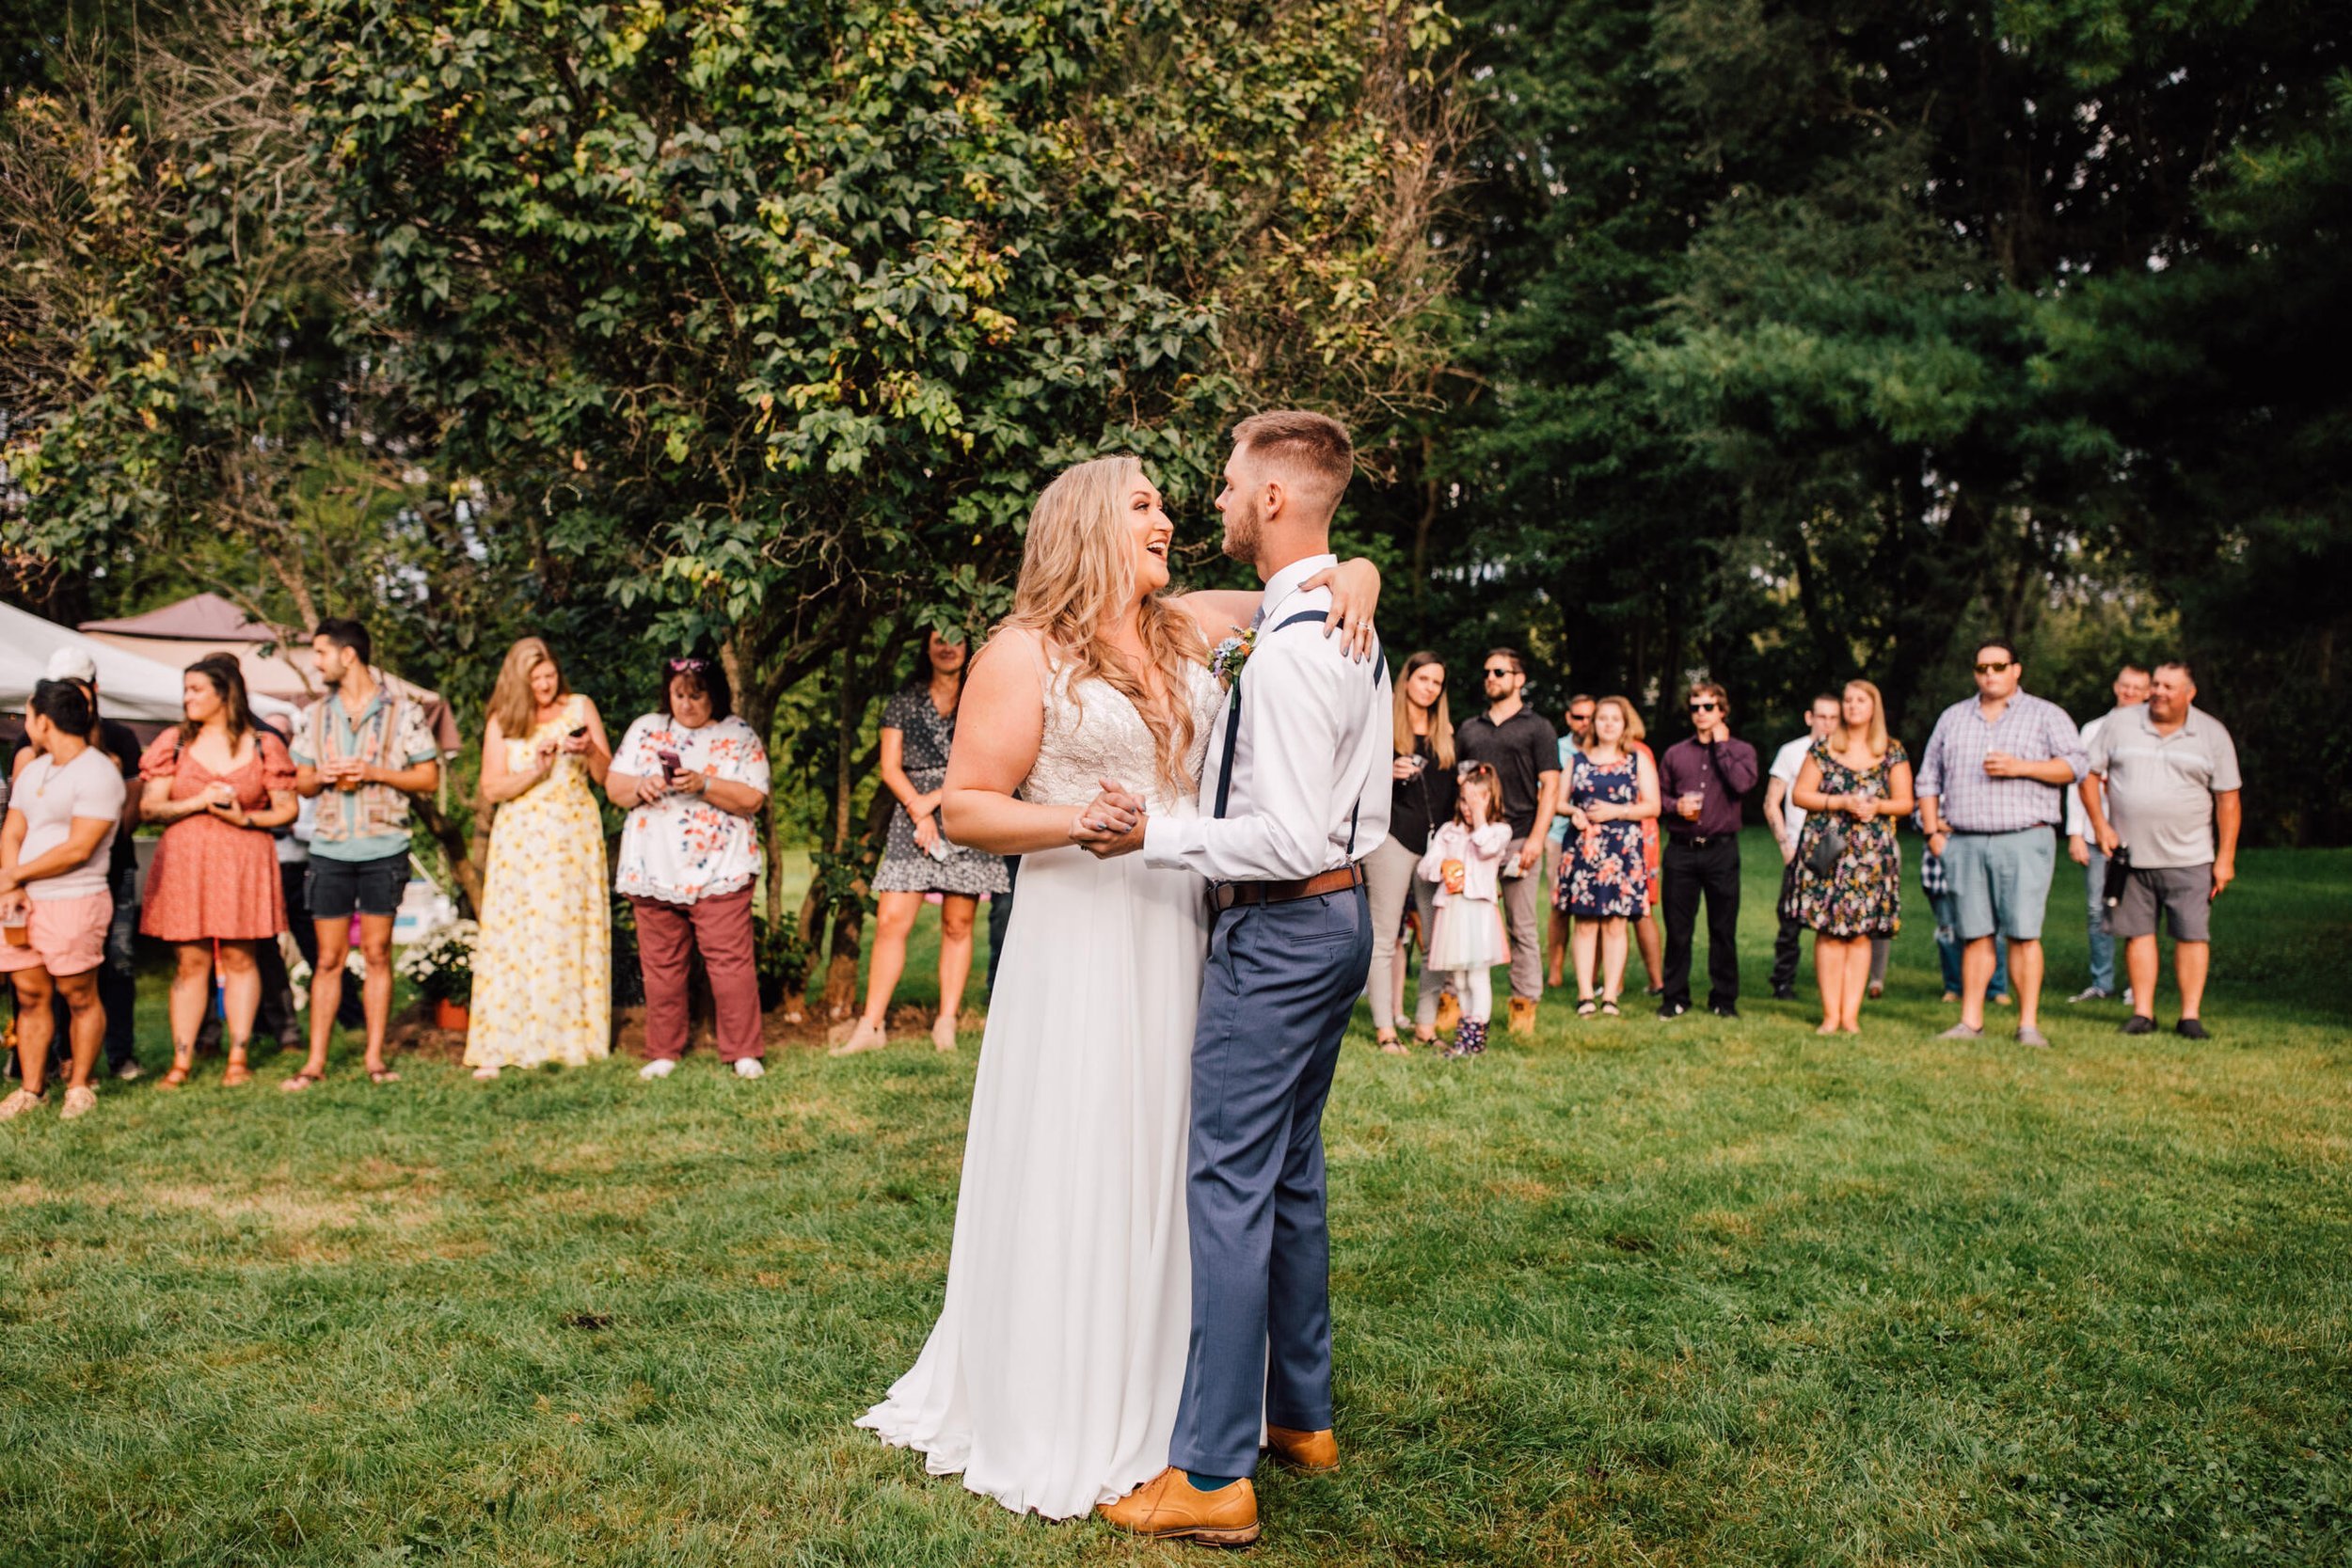  Bride and groom smile at each other during their first dance at their backyard wedding reception 